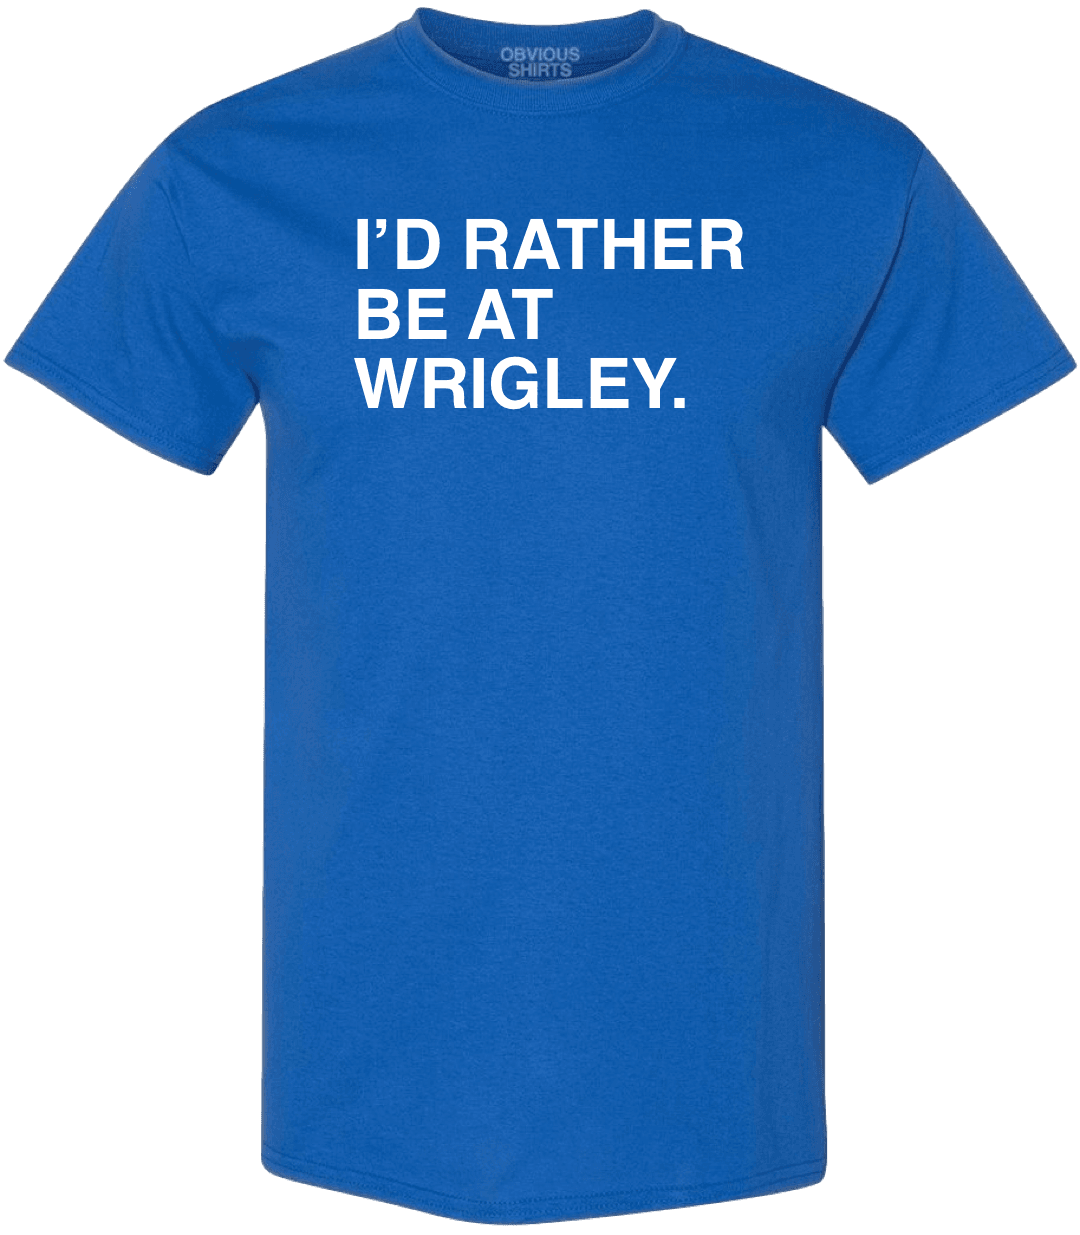 I'D RATHER BE AT WRIGLEY. (BIG & TALL) - OBVIOUS SHIRTS.